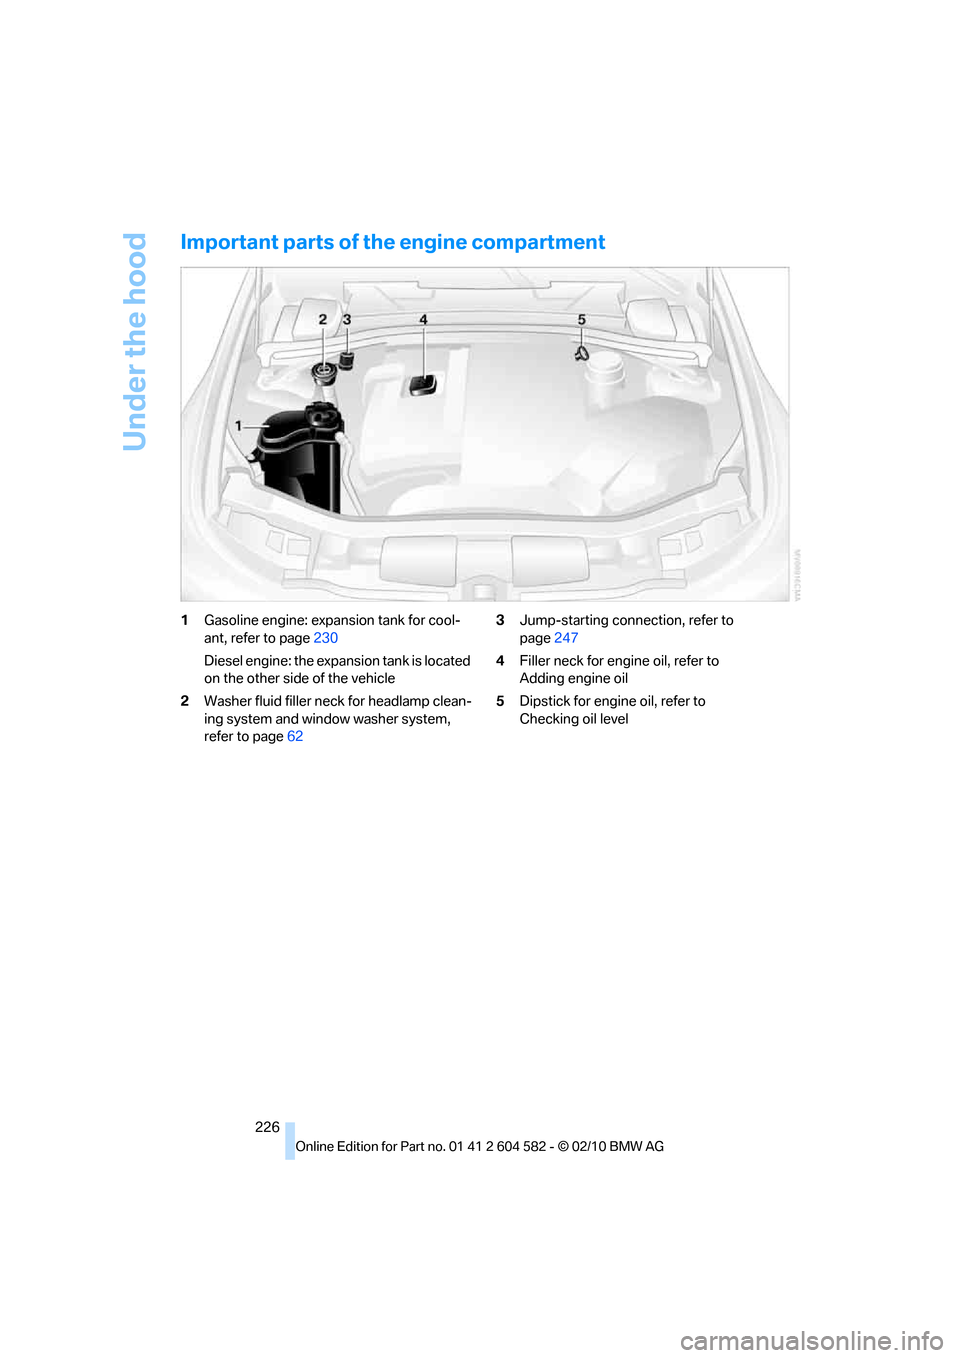 BMW 335I TOURING 2011 E91 Owners Manual Under the hood
226
Important parts of the engine compartment
1Gasoline engine: expansion tank for cool-
ant, refer to page230
Diesel engine: the expansion tank is located 
on the other side of the veh